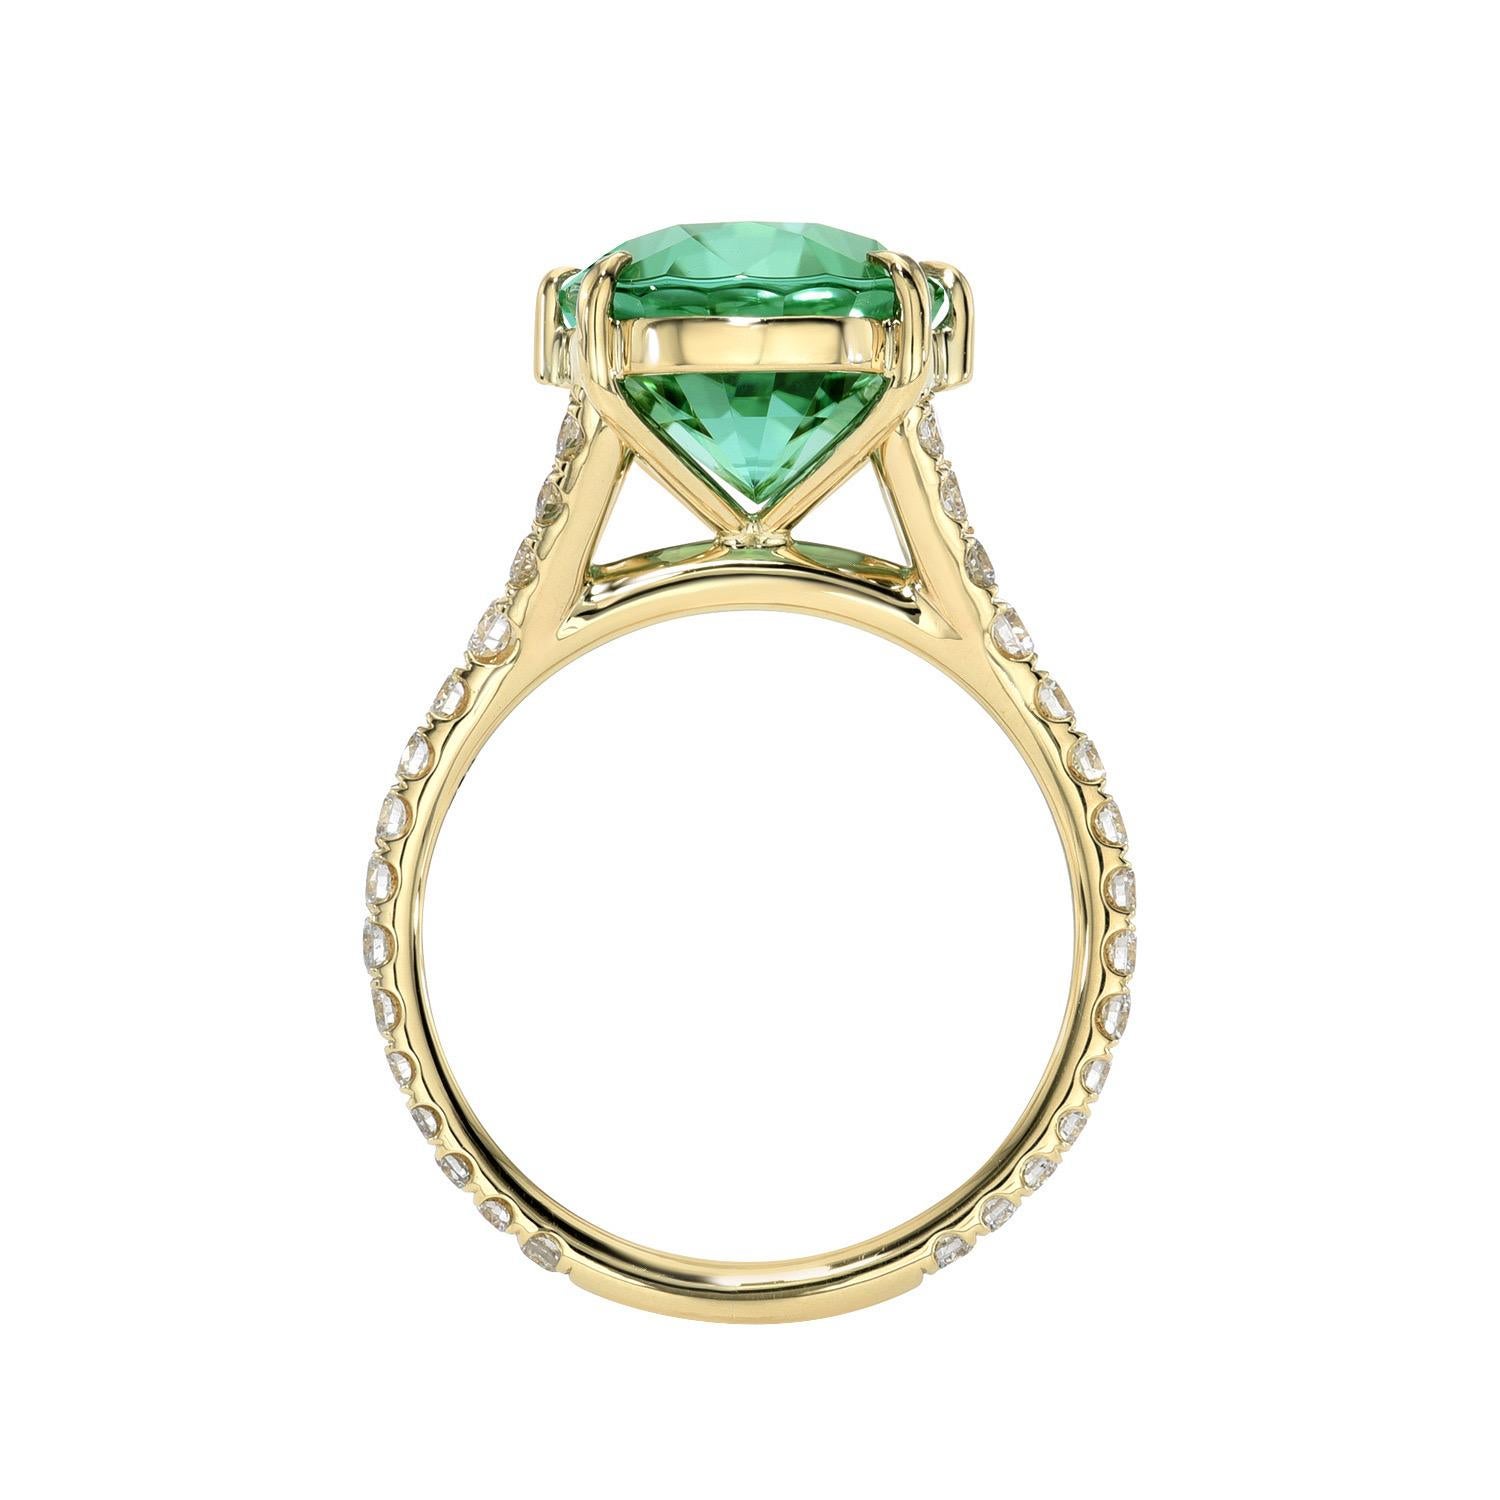 18K yellow gold ring set with an exquisite 6.33 carat Mint Green Tourmaline oval, decorated with a total of 0.61 carat, round brilliant collection diamonds.
Ring size 6. Resizing is complementary upon request.
Crafted by extremely skilled hands in